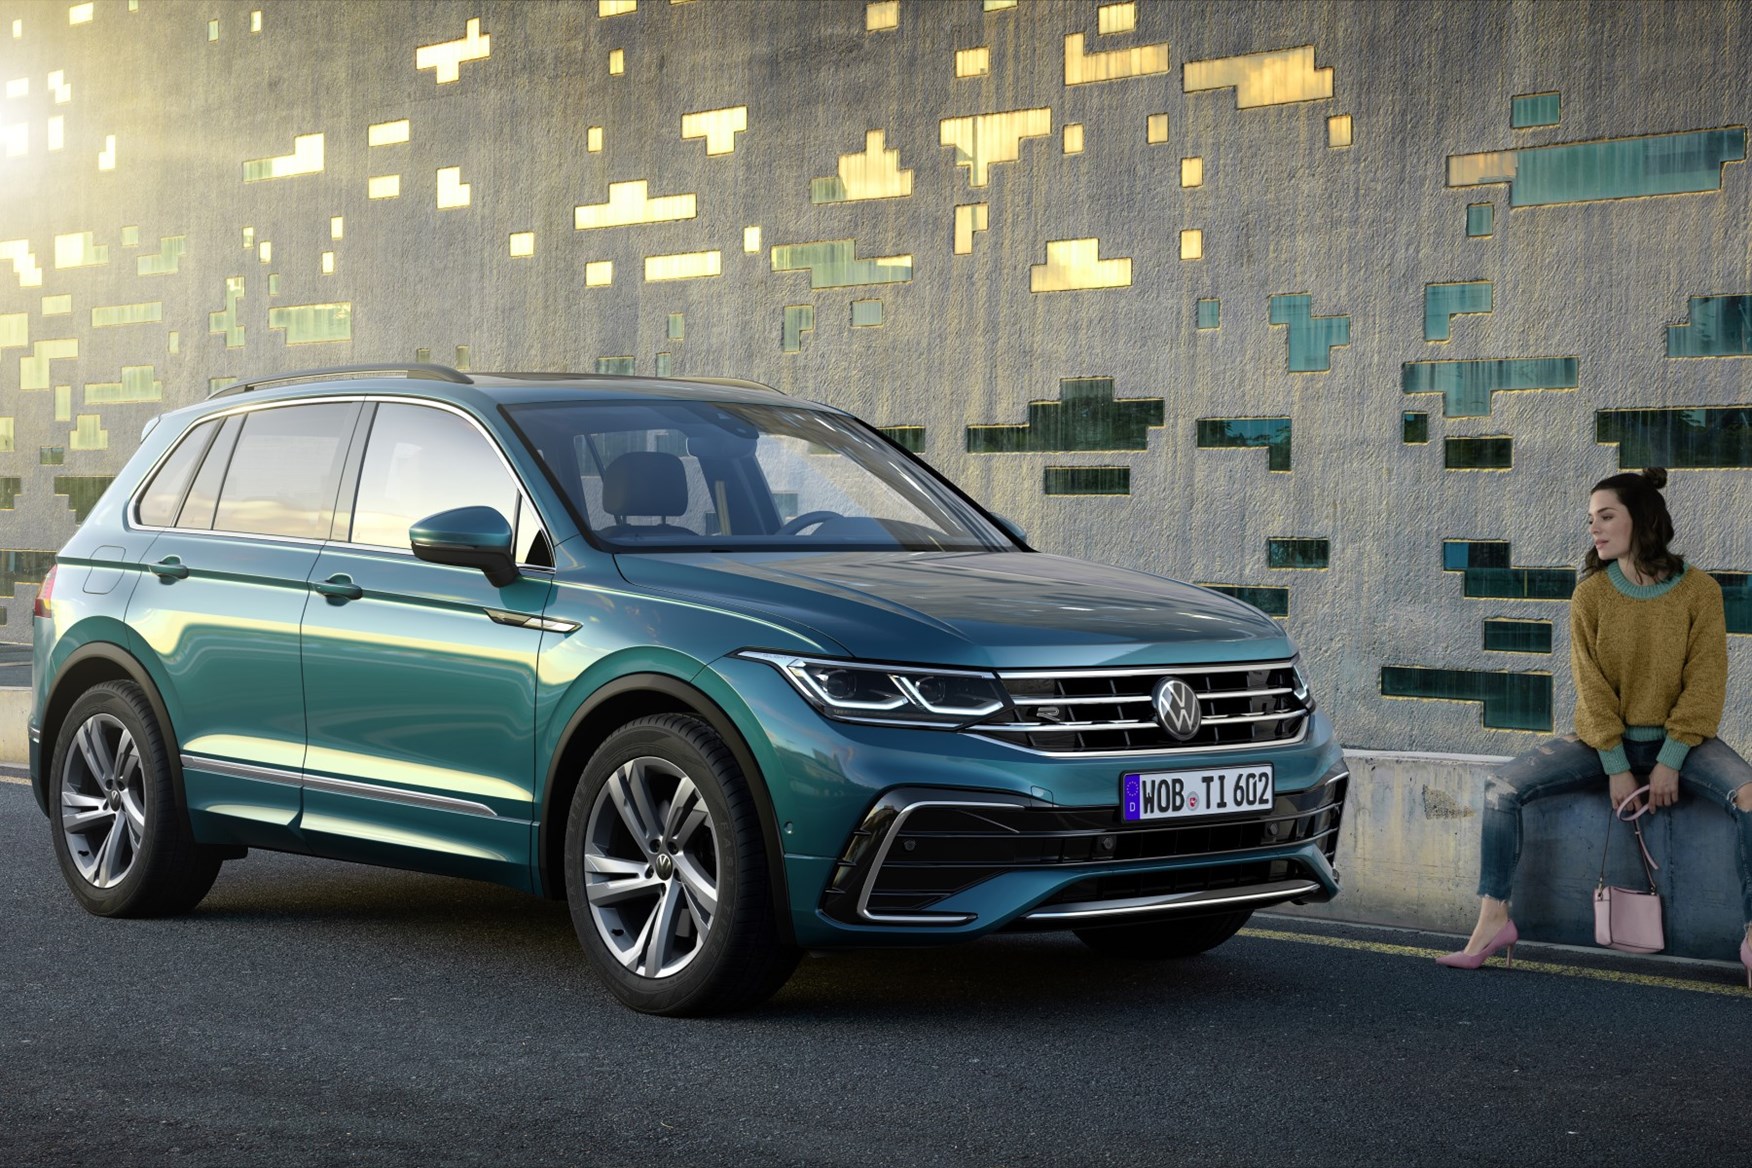 VW Tiguan gets major refresh with new tech and plugin